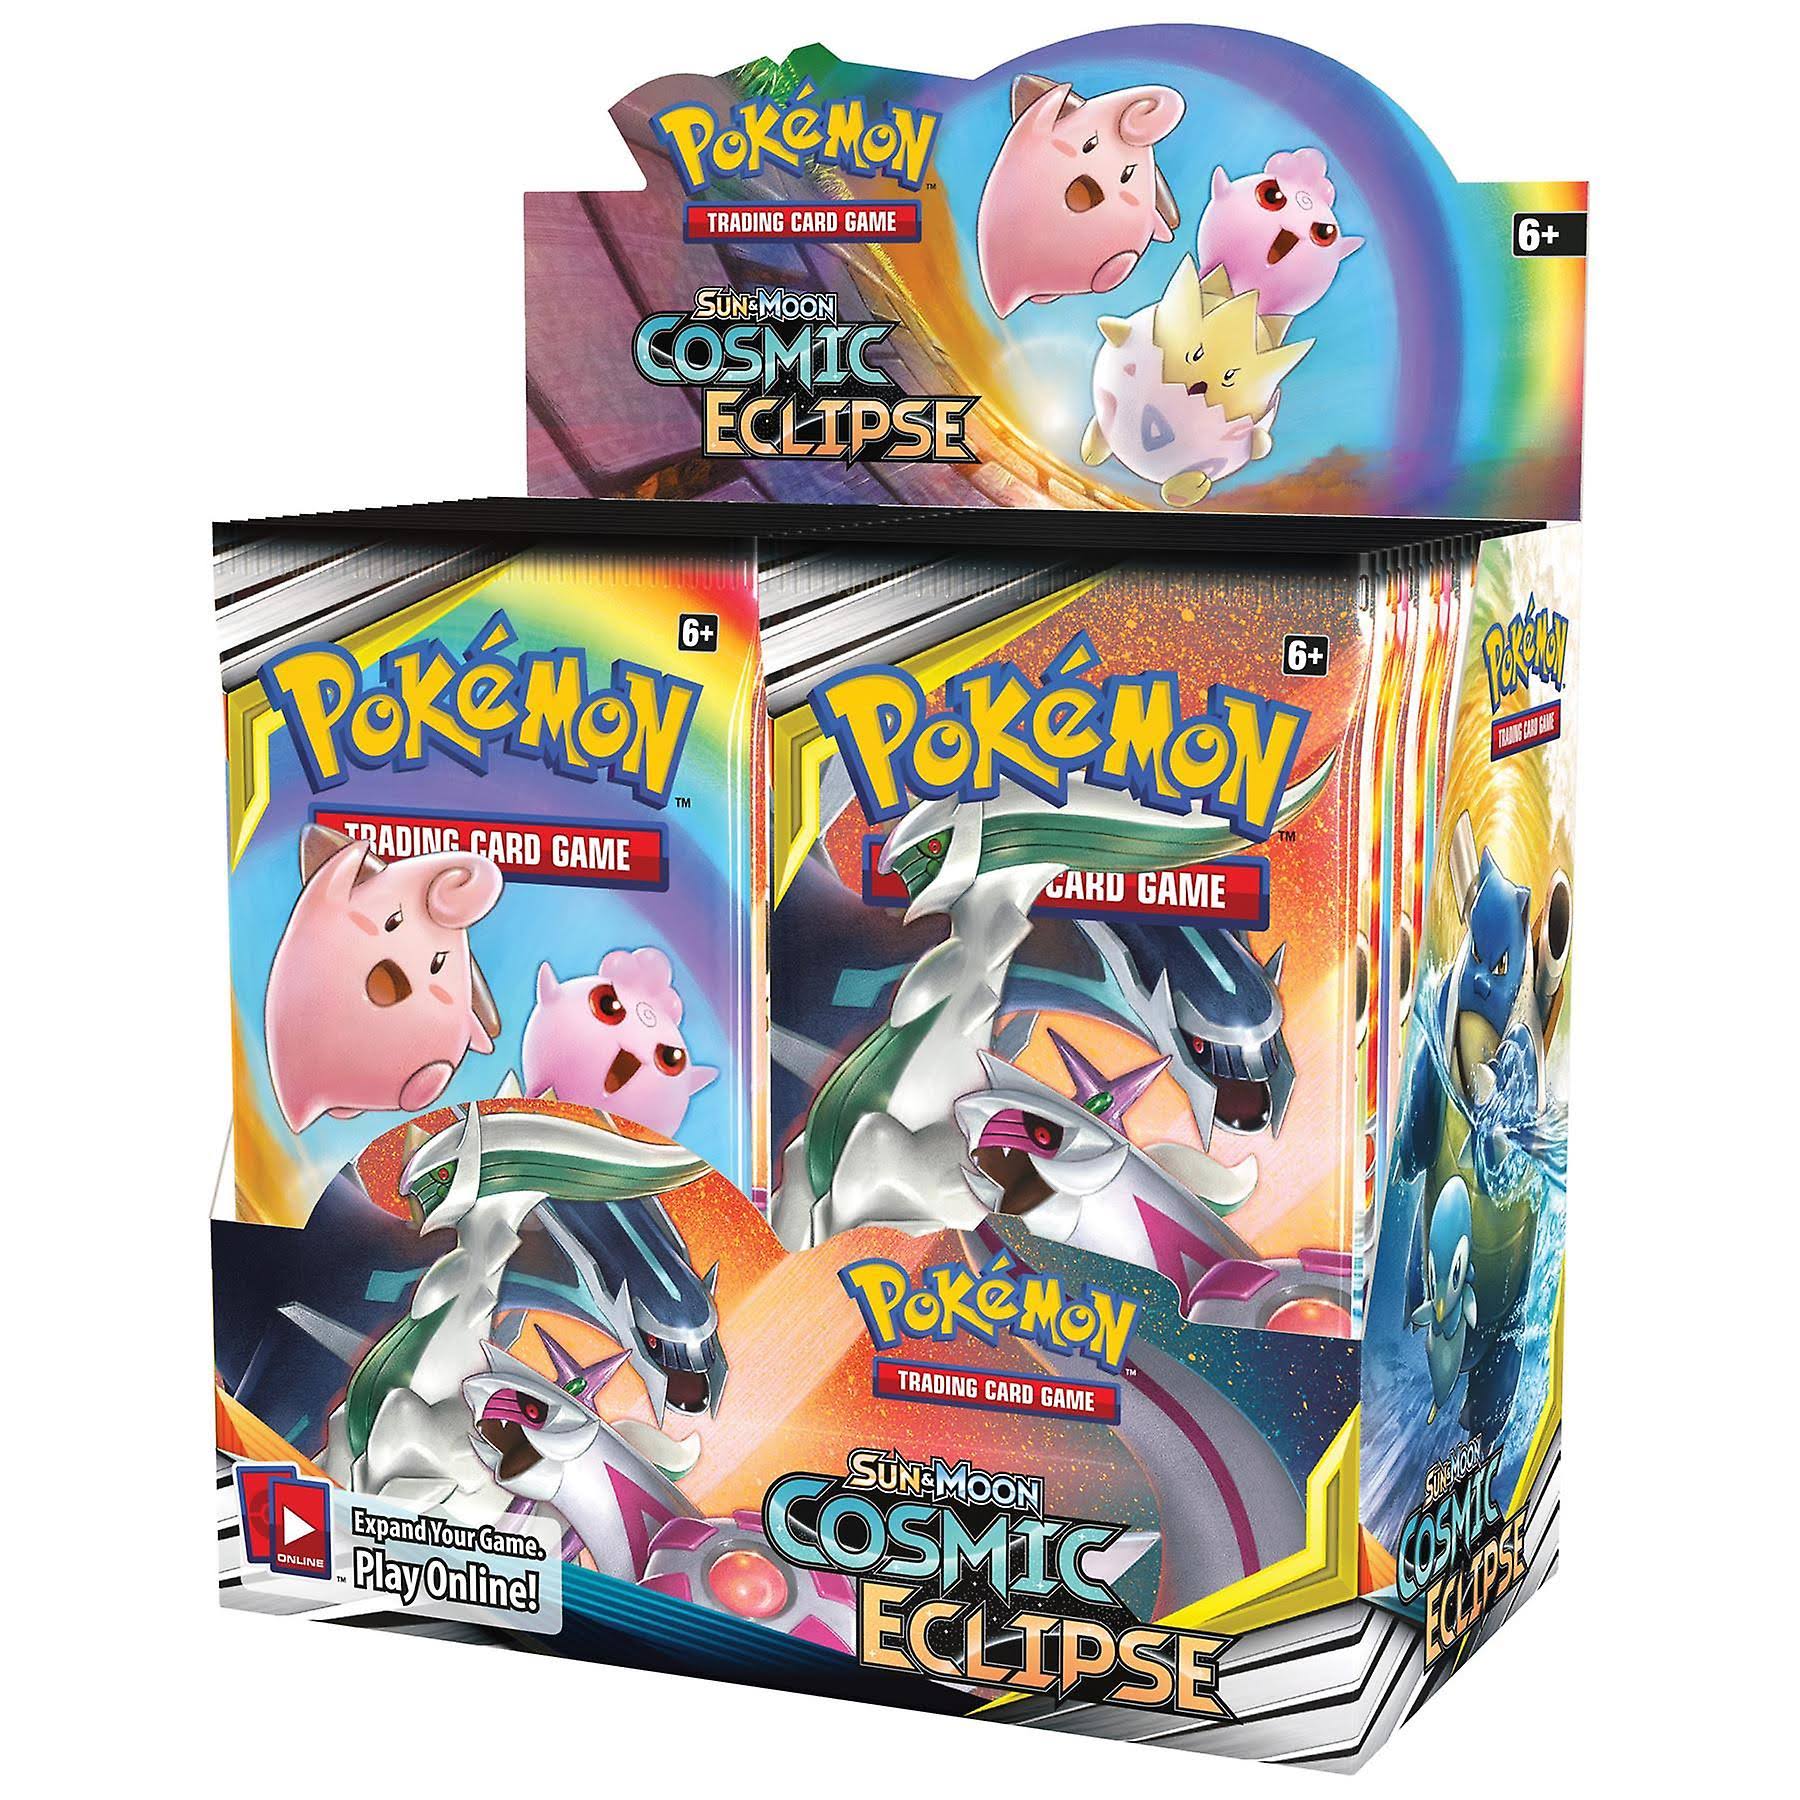 Pokemon: Sun and Moon Cosmic Eclipse Booster Box Card Game